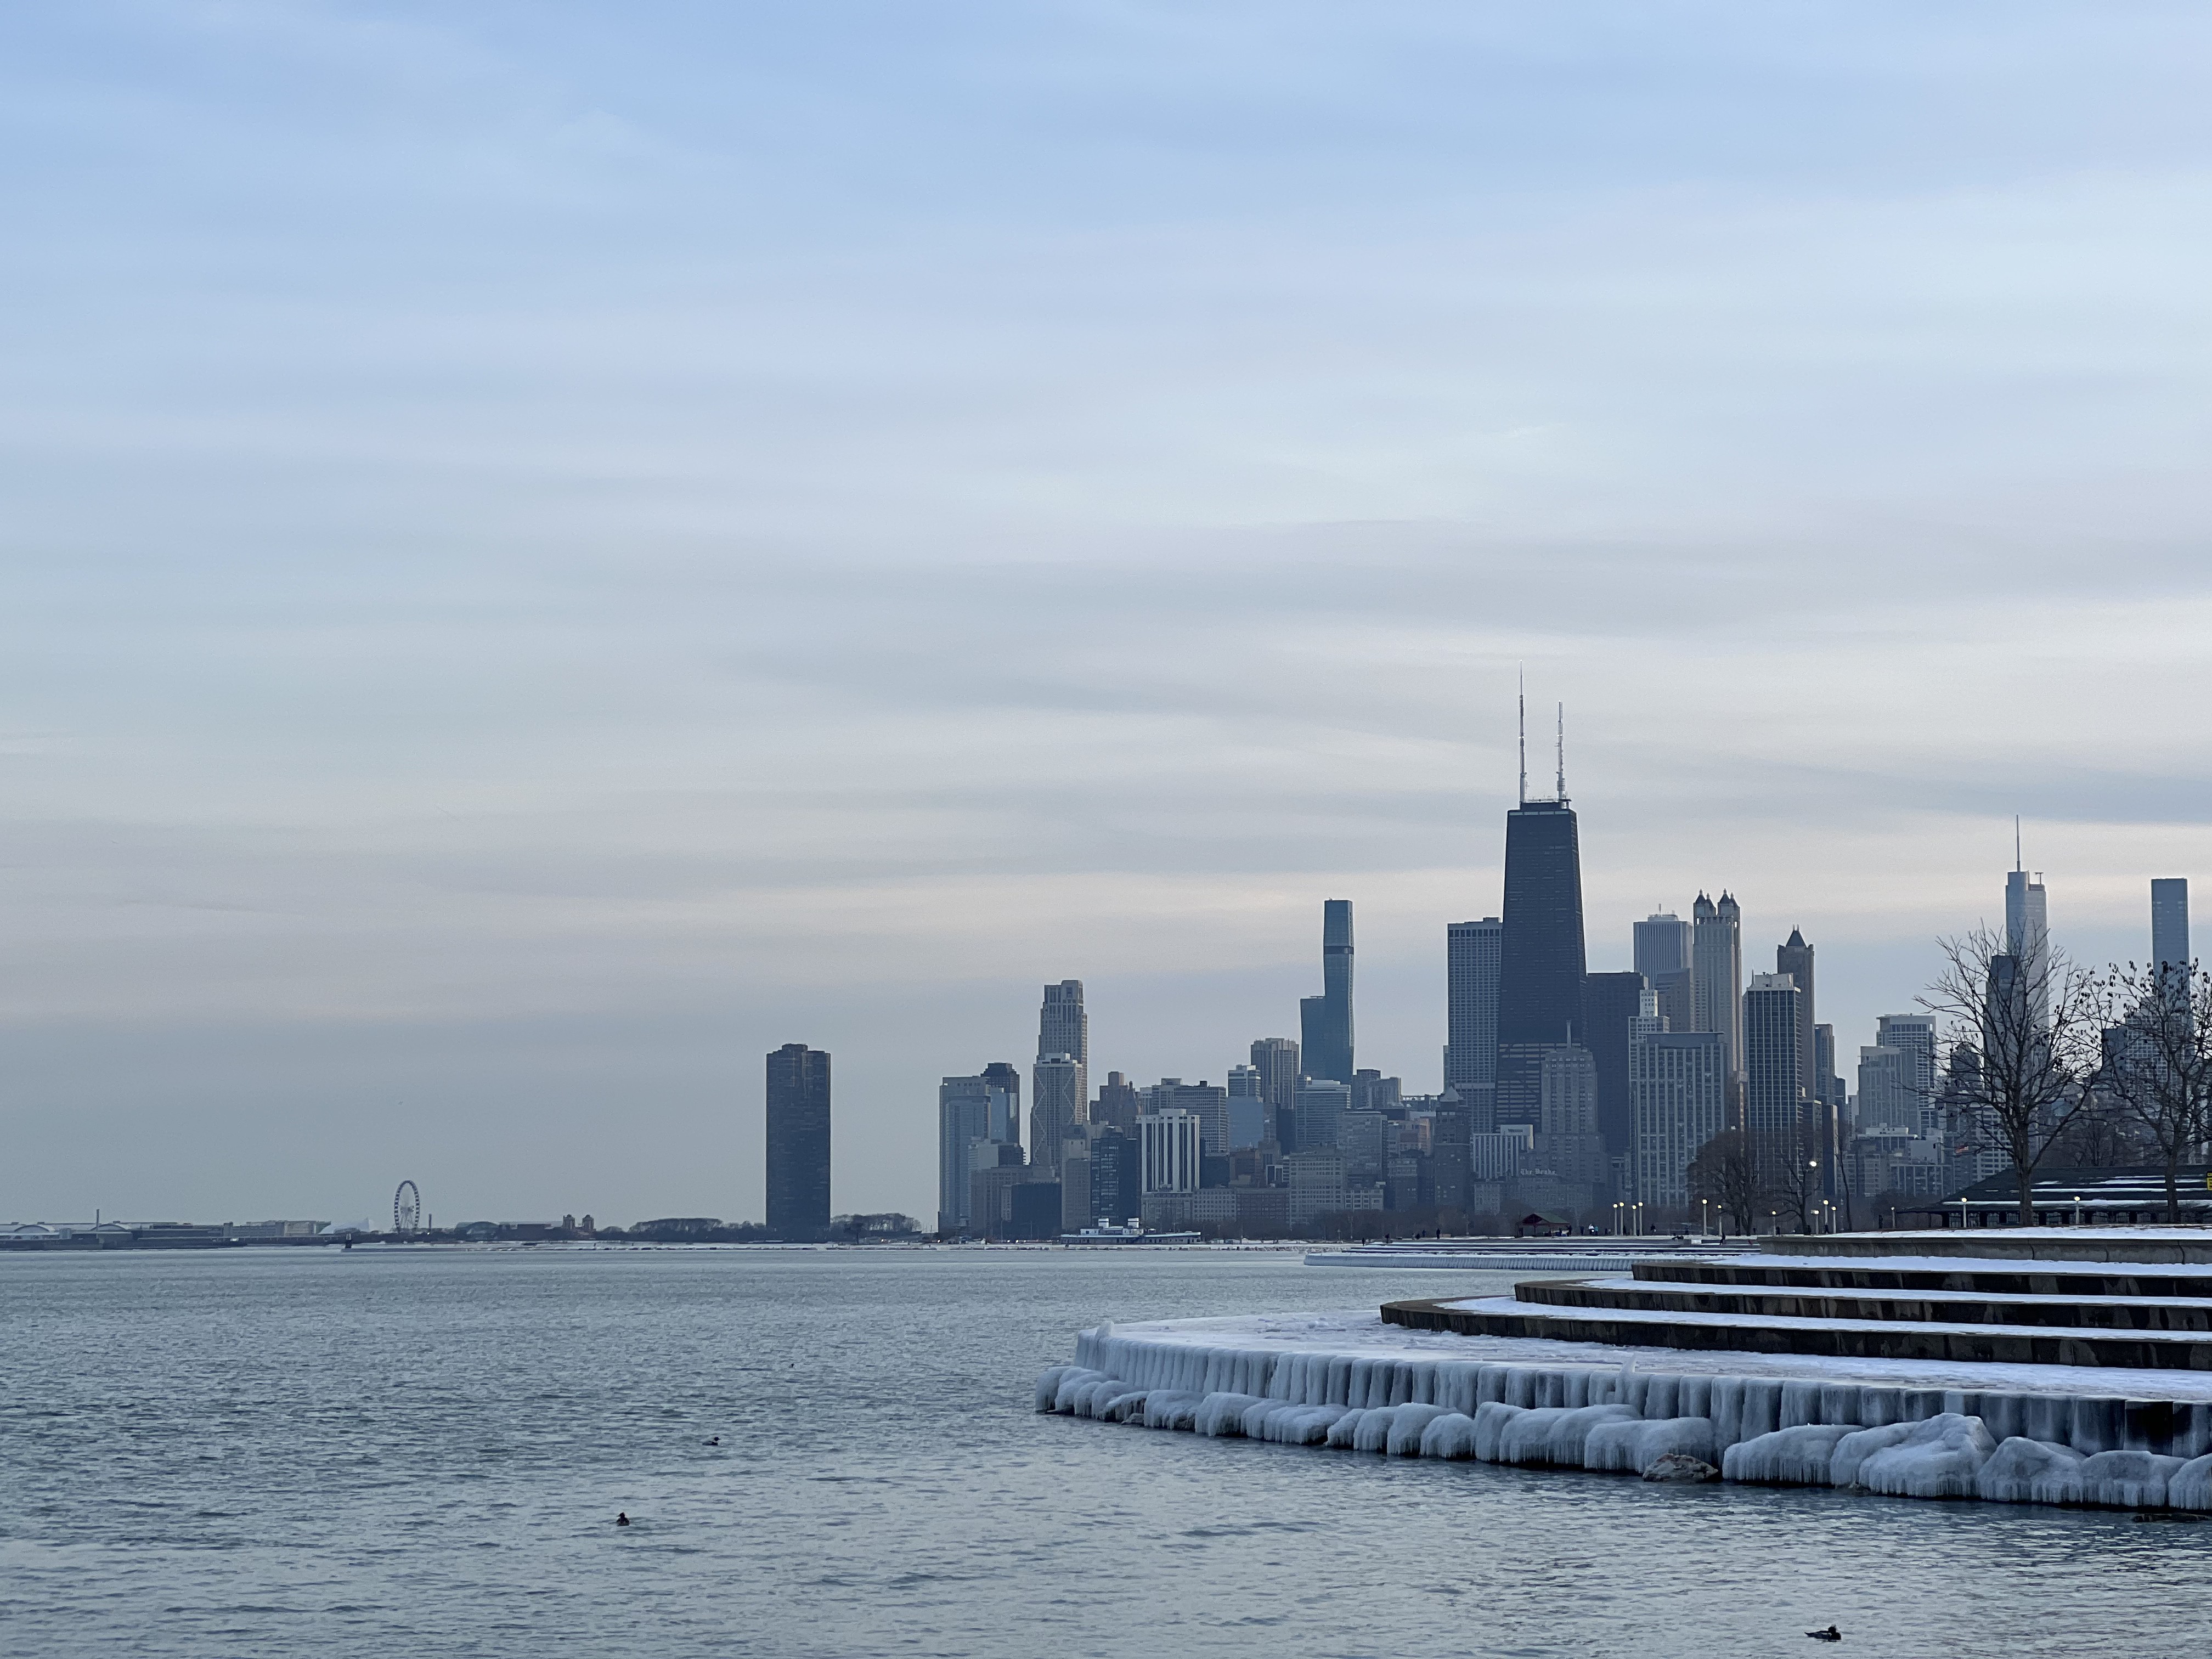 Chicago skyline over Lake Michigan with ice draped over the concrete shoreline